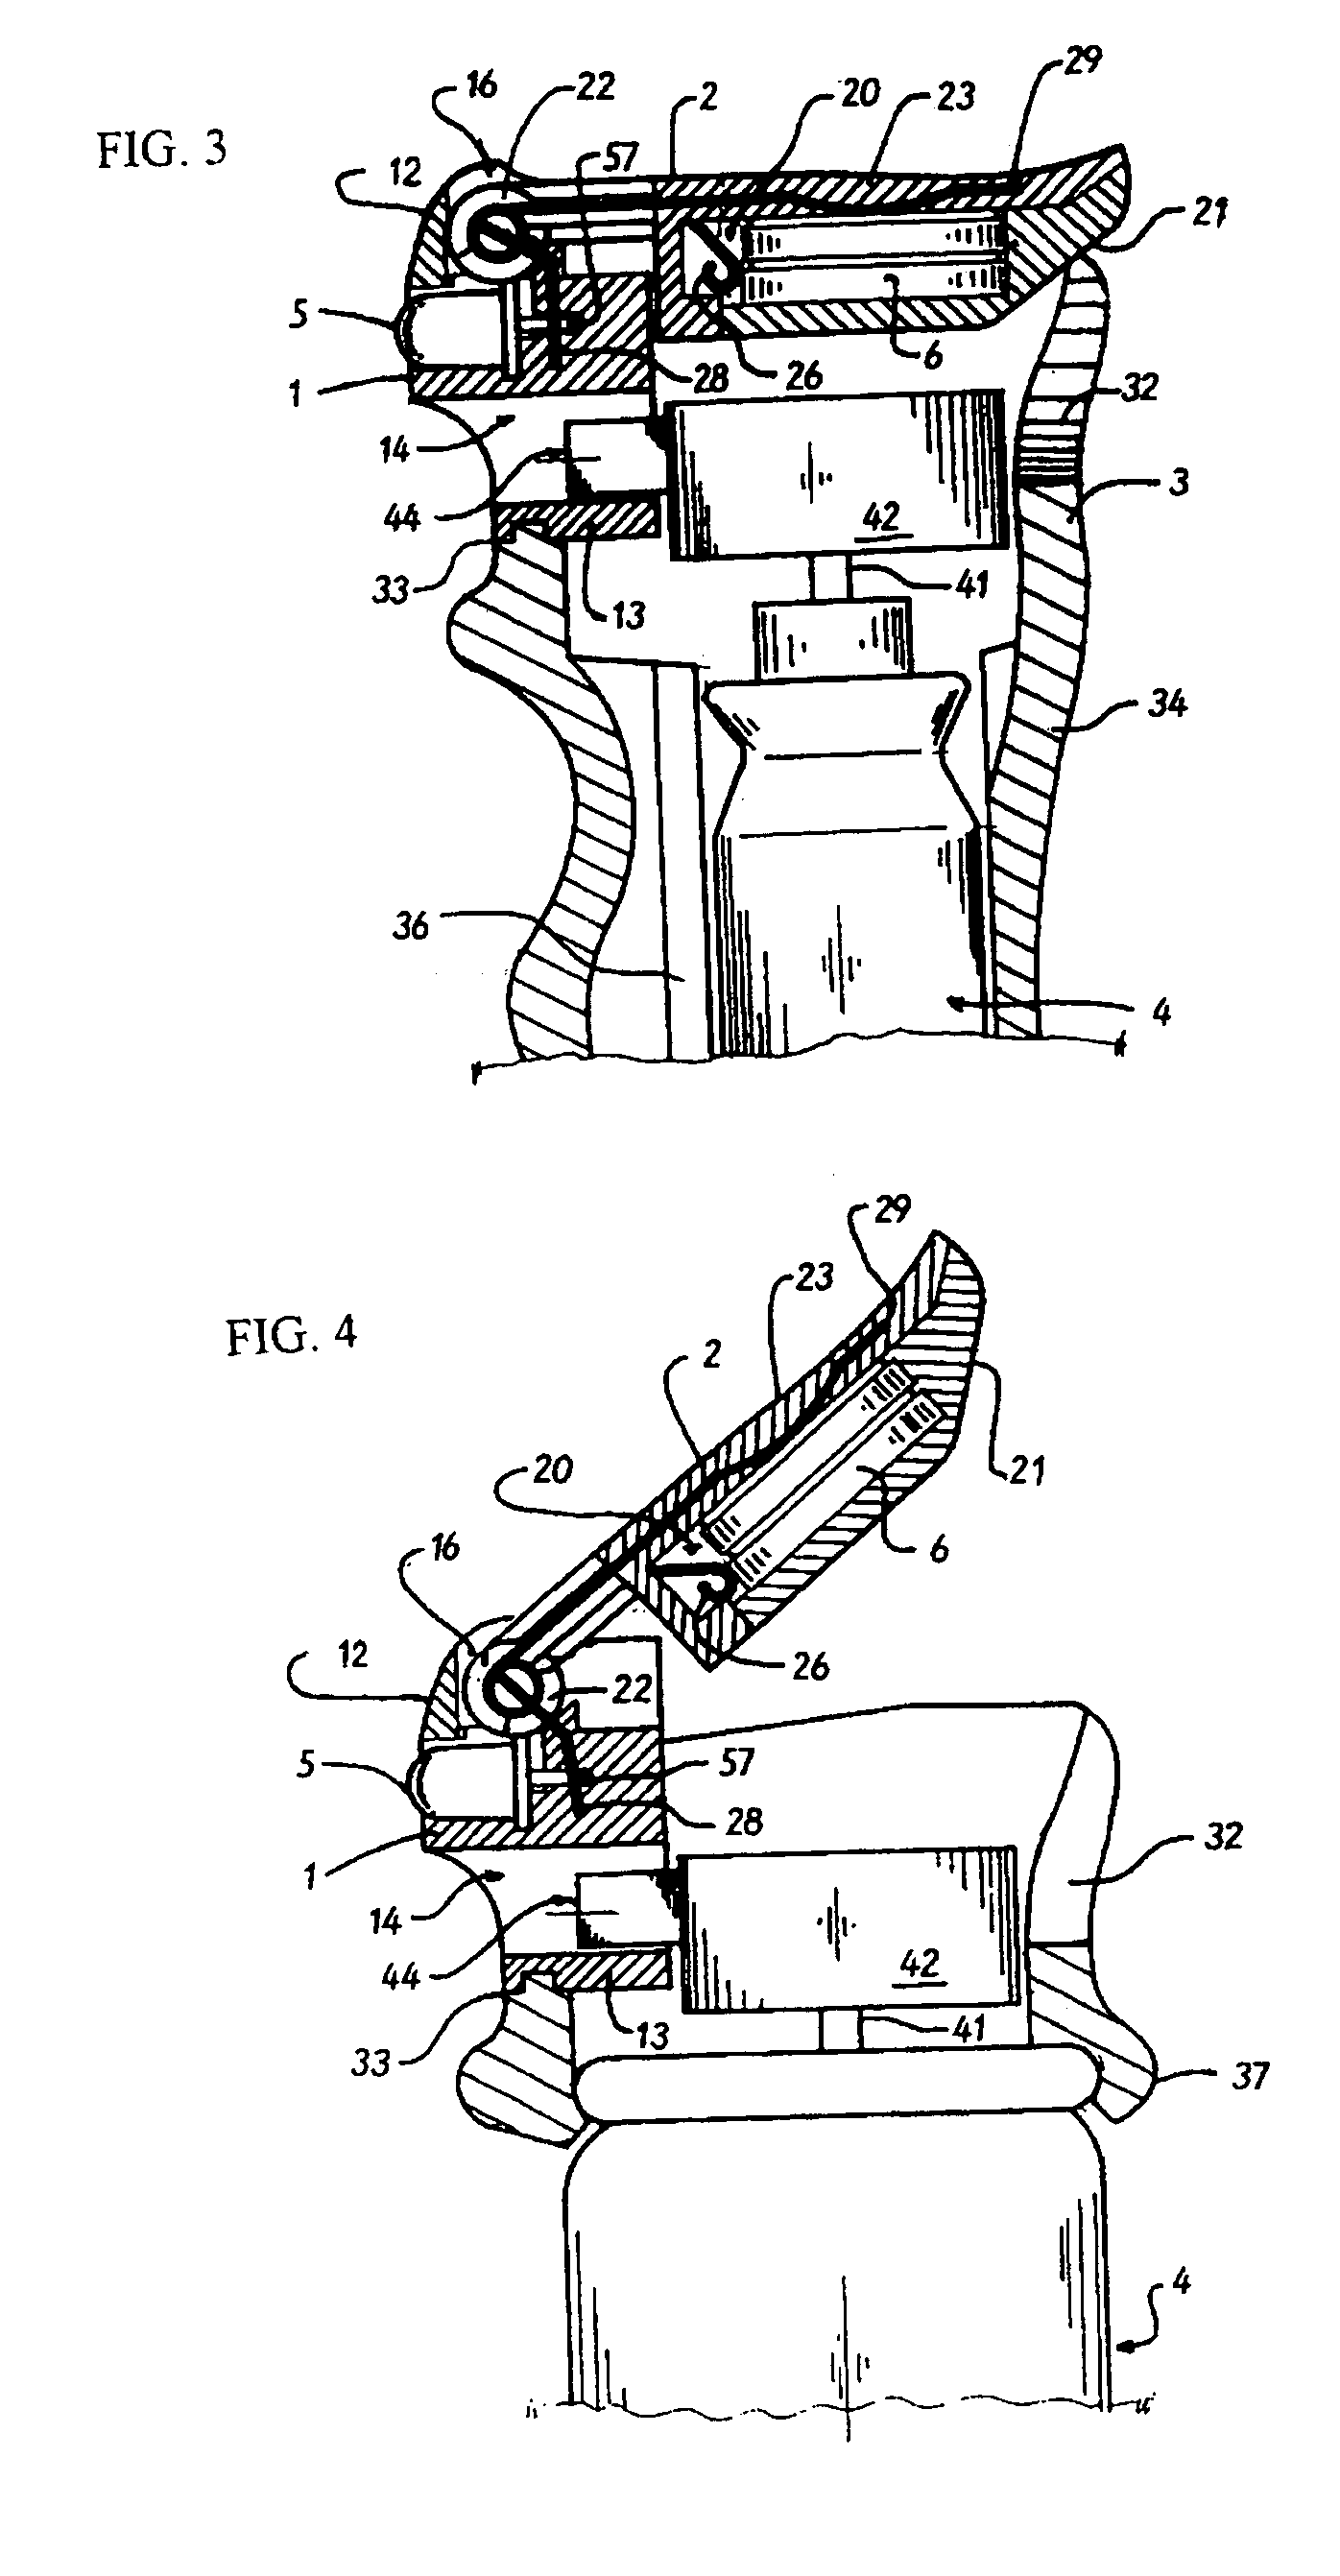 Control unit for a light source in combination with a spray defense container